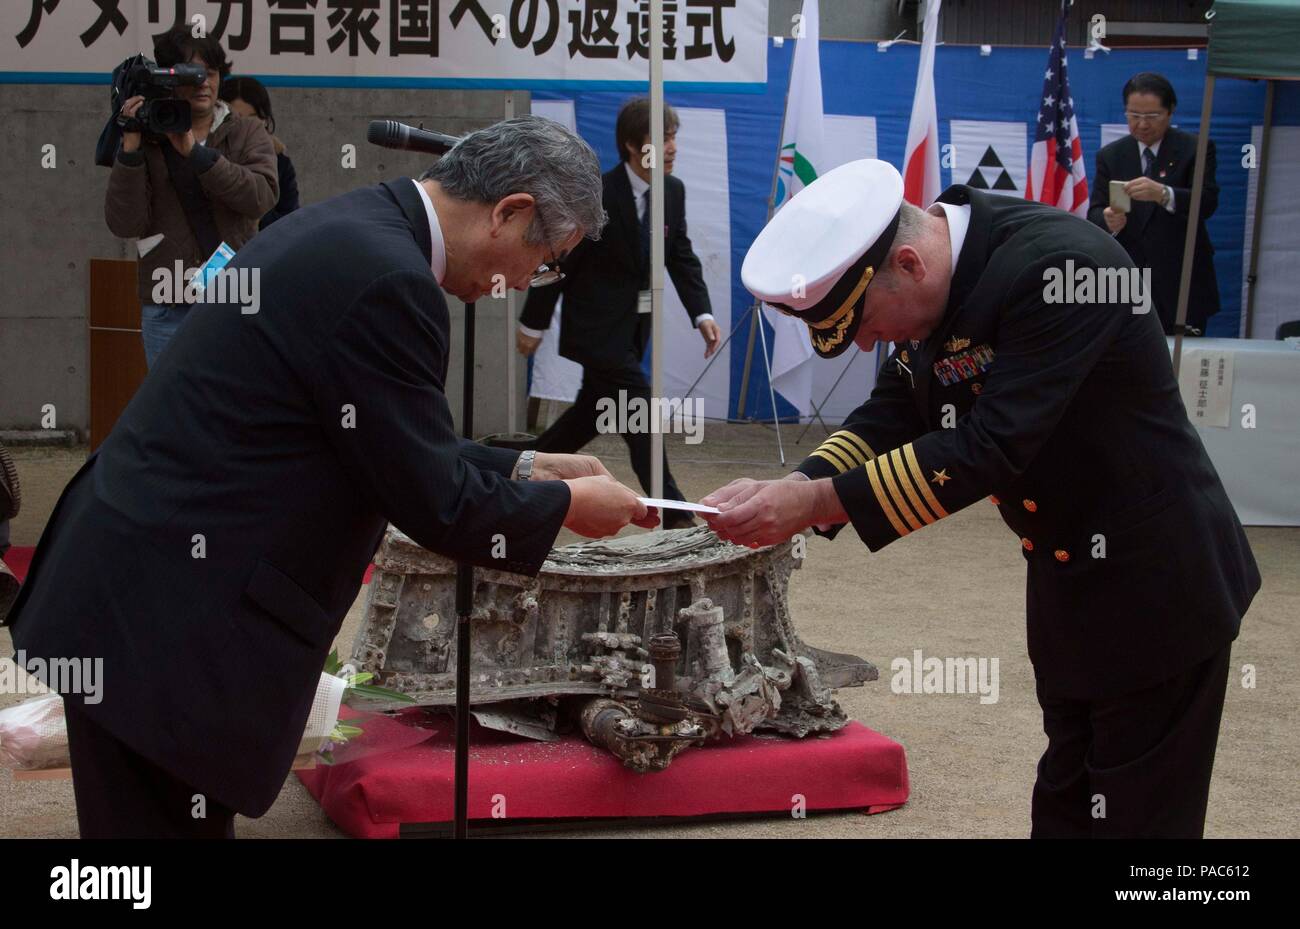 SAIKI CITY, Japan (March 6, 2016) Commander U.S. Fleet Activities Sasebo Capt. Matthew Ovios accepts the inventory of parts of a World War II F4U-1D Corsair fighter-bomber from Saiki City Mayor Yasuyoshi Nishijima at the departure ceremony held for the aircraft parts at Yawaragi Peace Memorial Hall in Saiki City, Japan on Mar. 6, 2016. The flowers honor the aircraft’s pilot whose body was never recovered. The parts are from a Fighter Squadron (VF) 10 Corsair that was ditched off Saiki on March 18, 1945 after attacking an Oita military airfield. They were salvaged from the water and displayed u Stock Photo